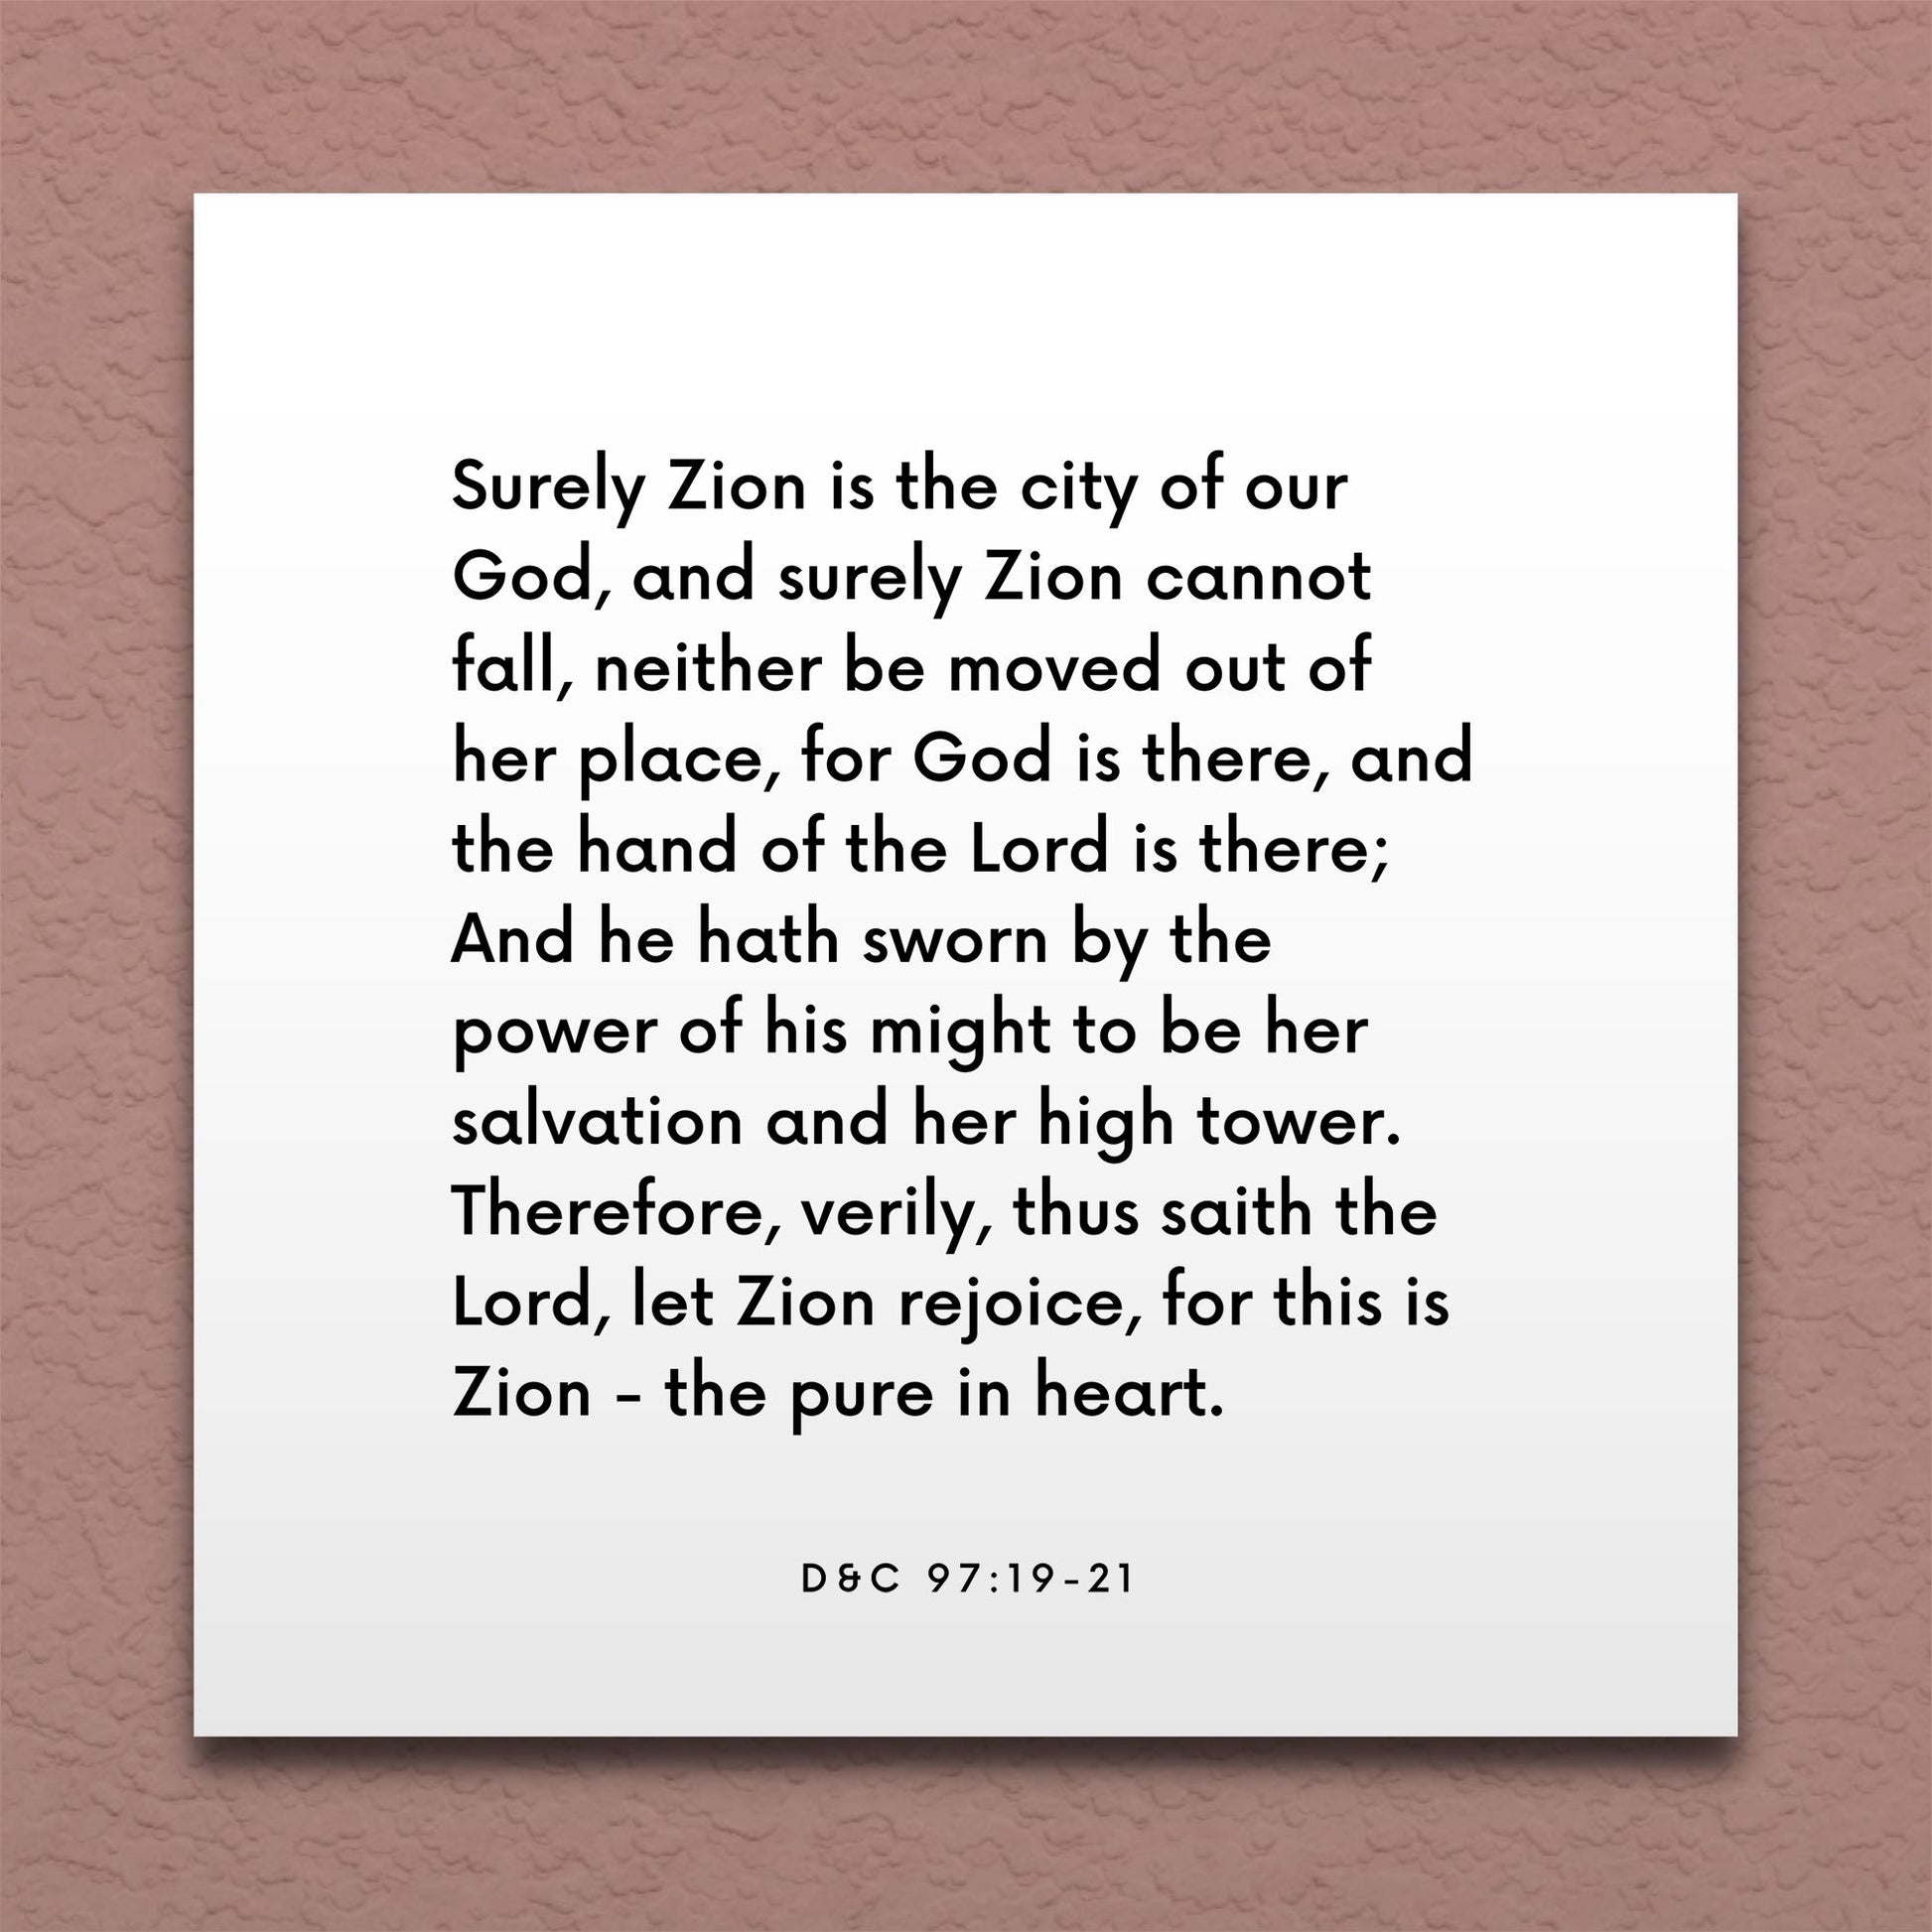 Wall-mounted scripture tile for D&C 97:19-21 - "This is Zion - the pure in heart"